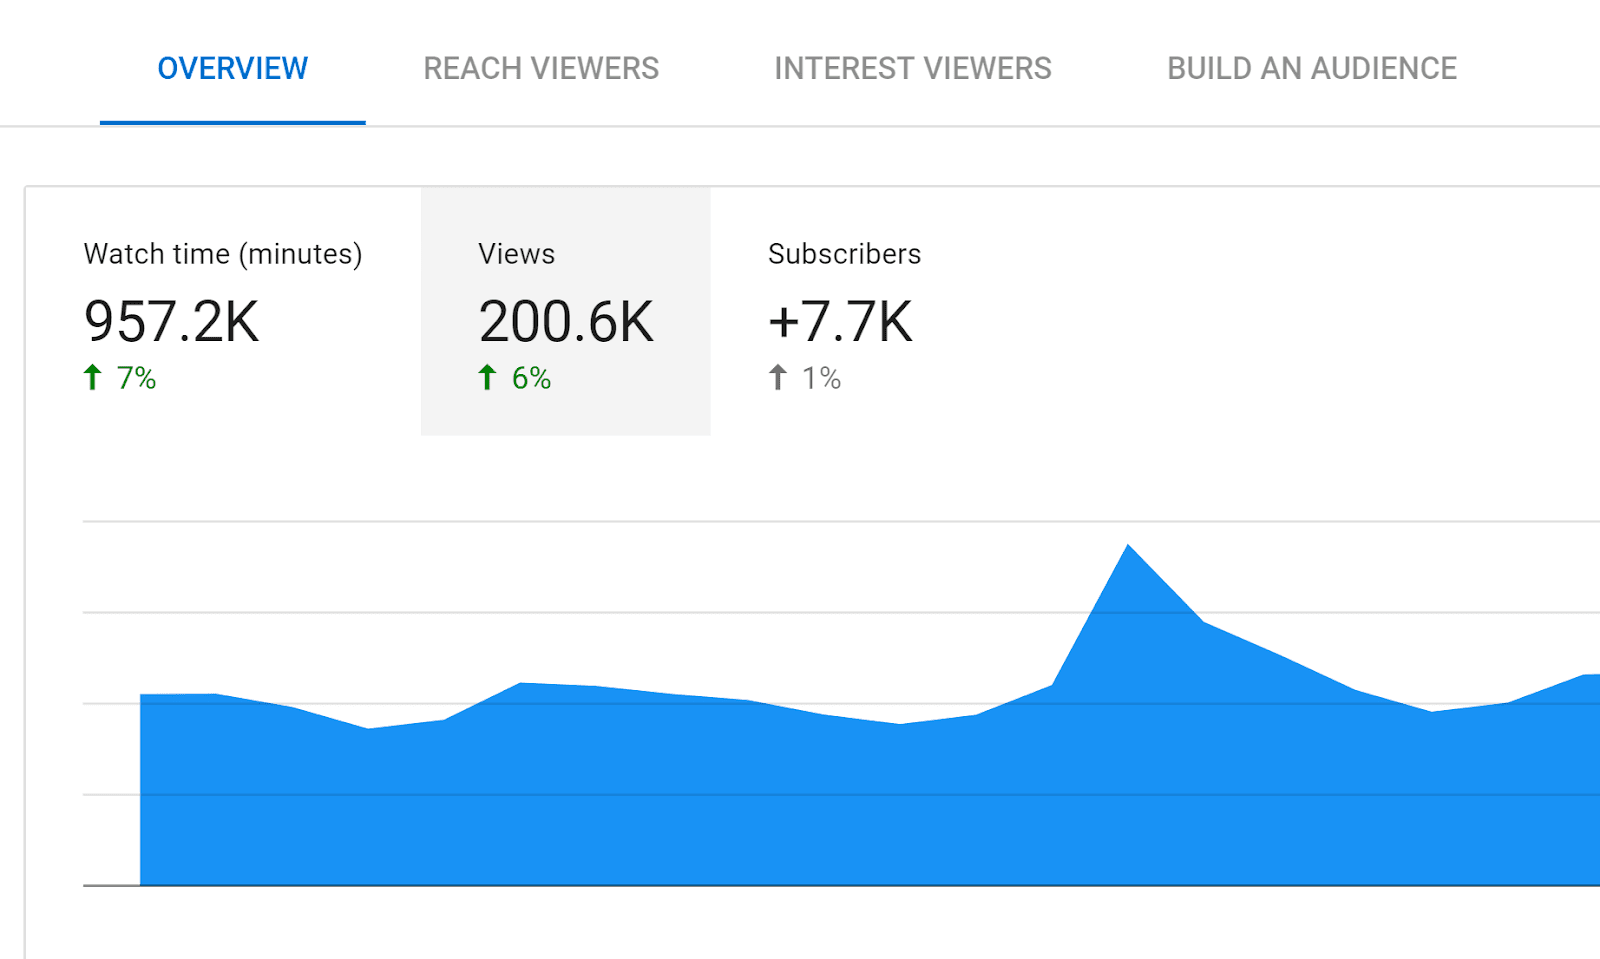 Videos generate over 200,000 monthly views